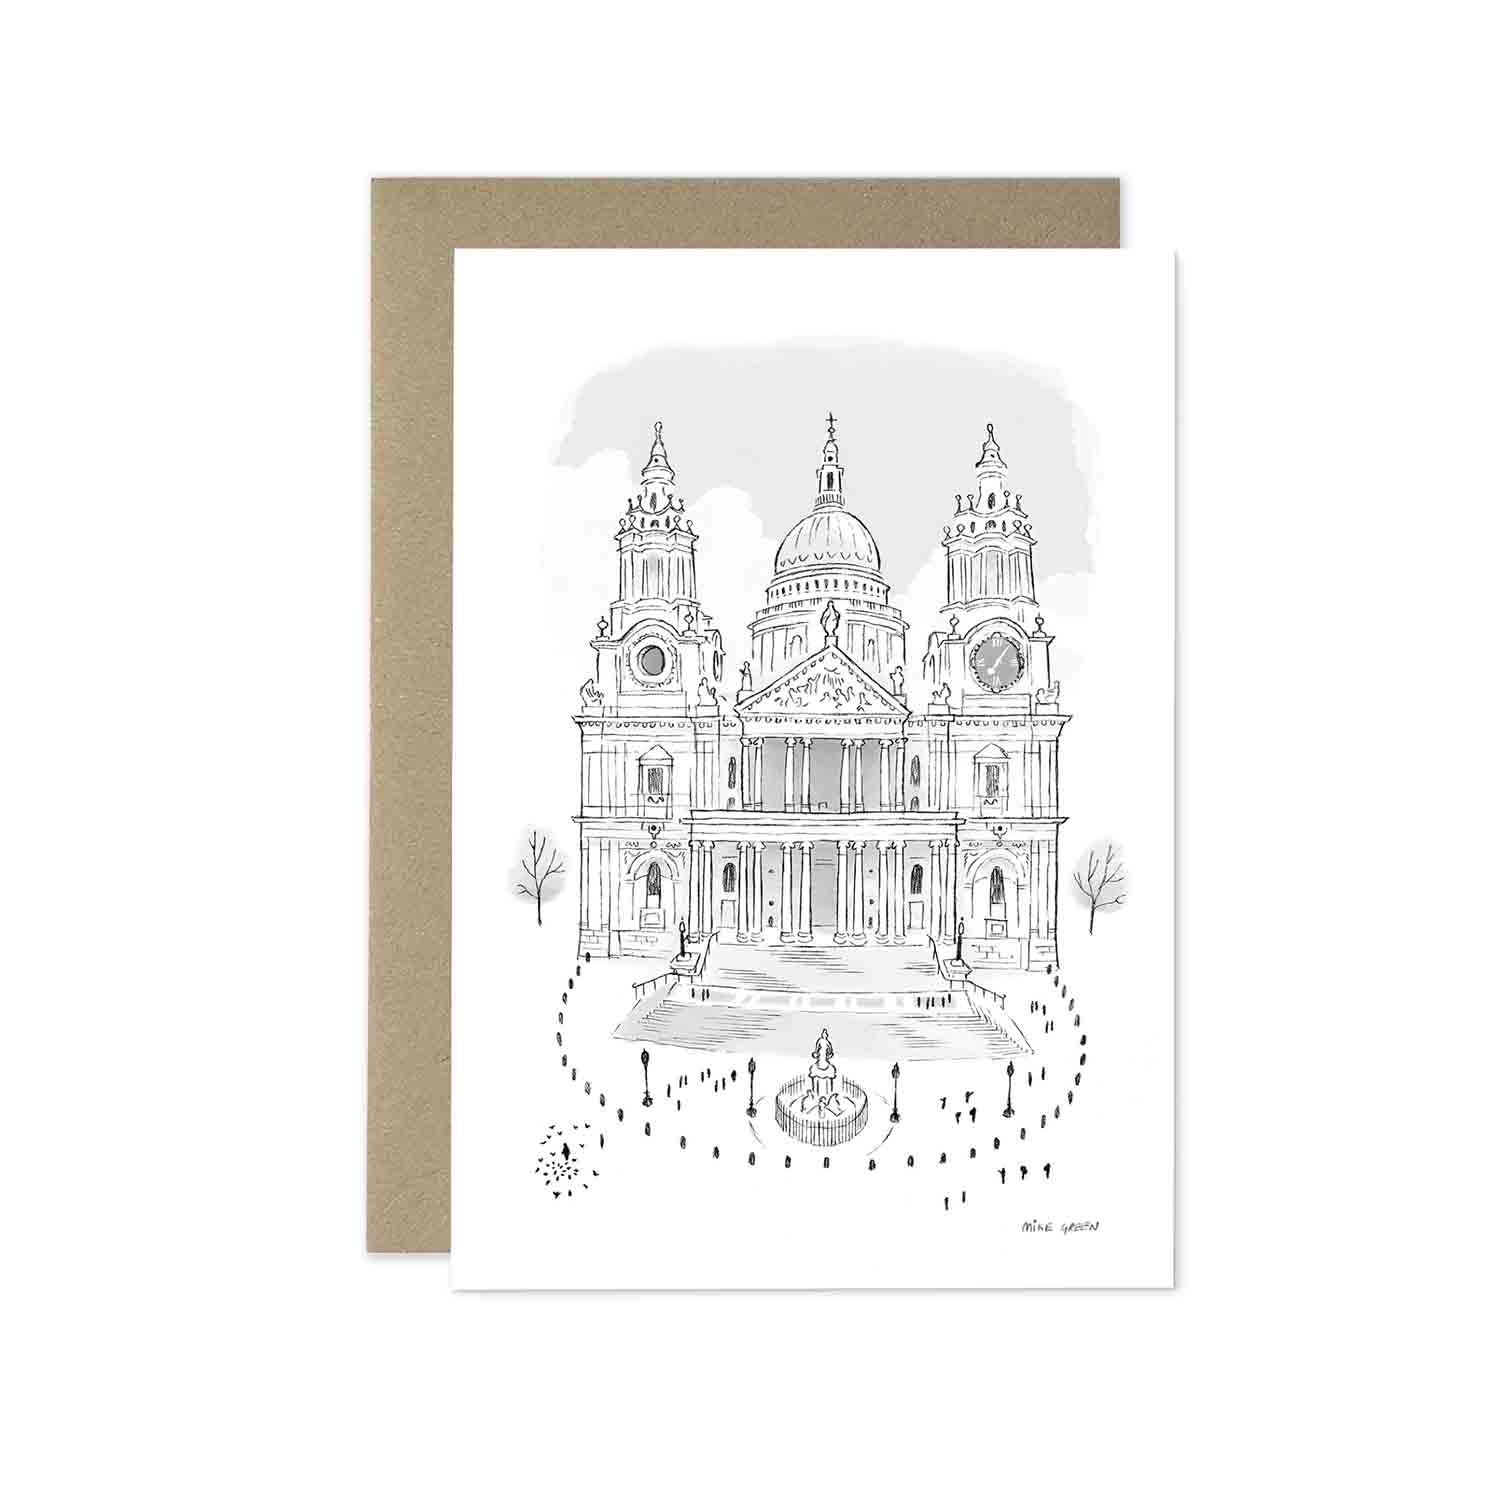 London's St Paul's Cathedral beautifully sketched on a greeting card from mike green illustration.